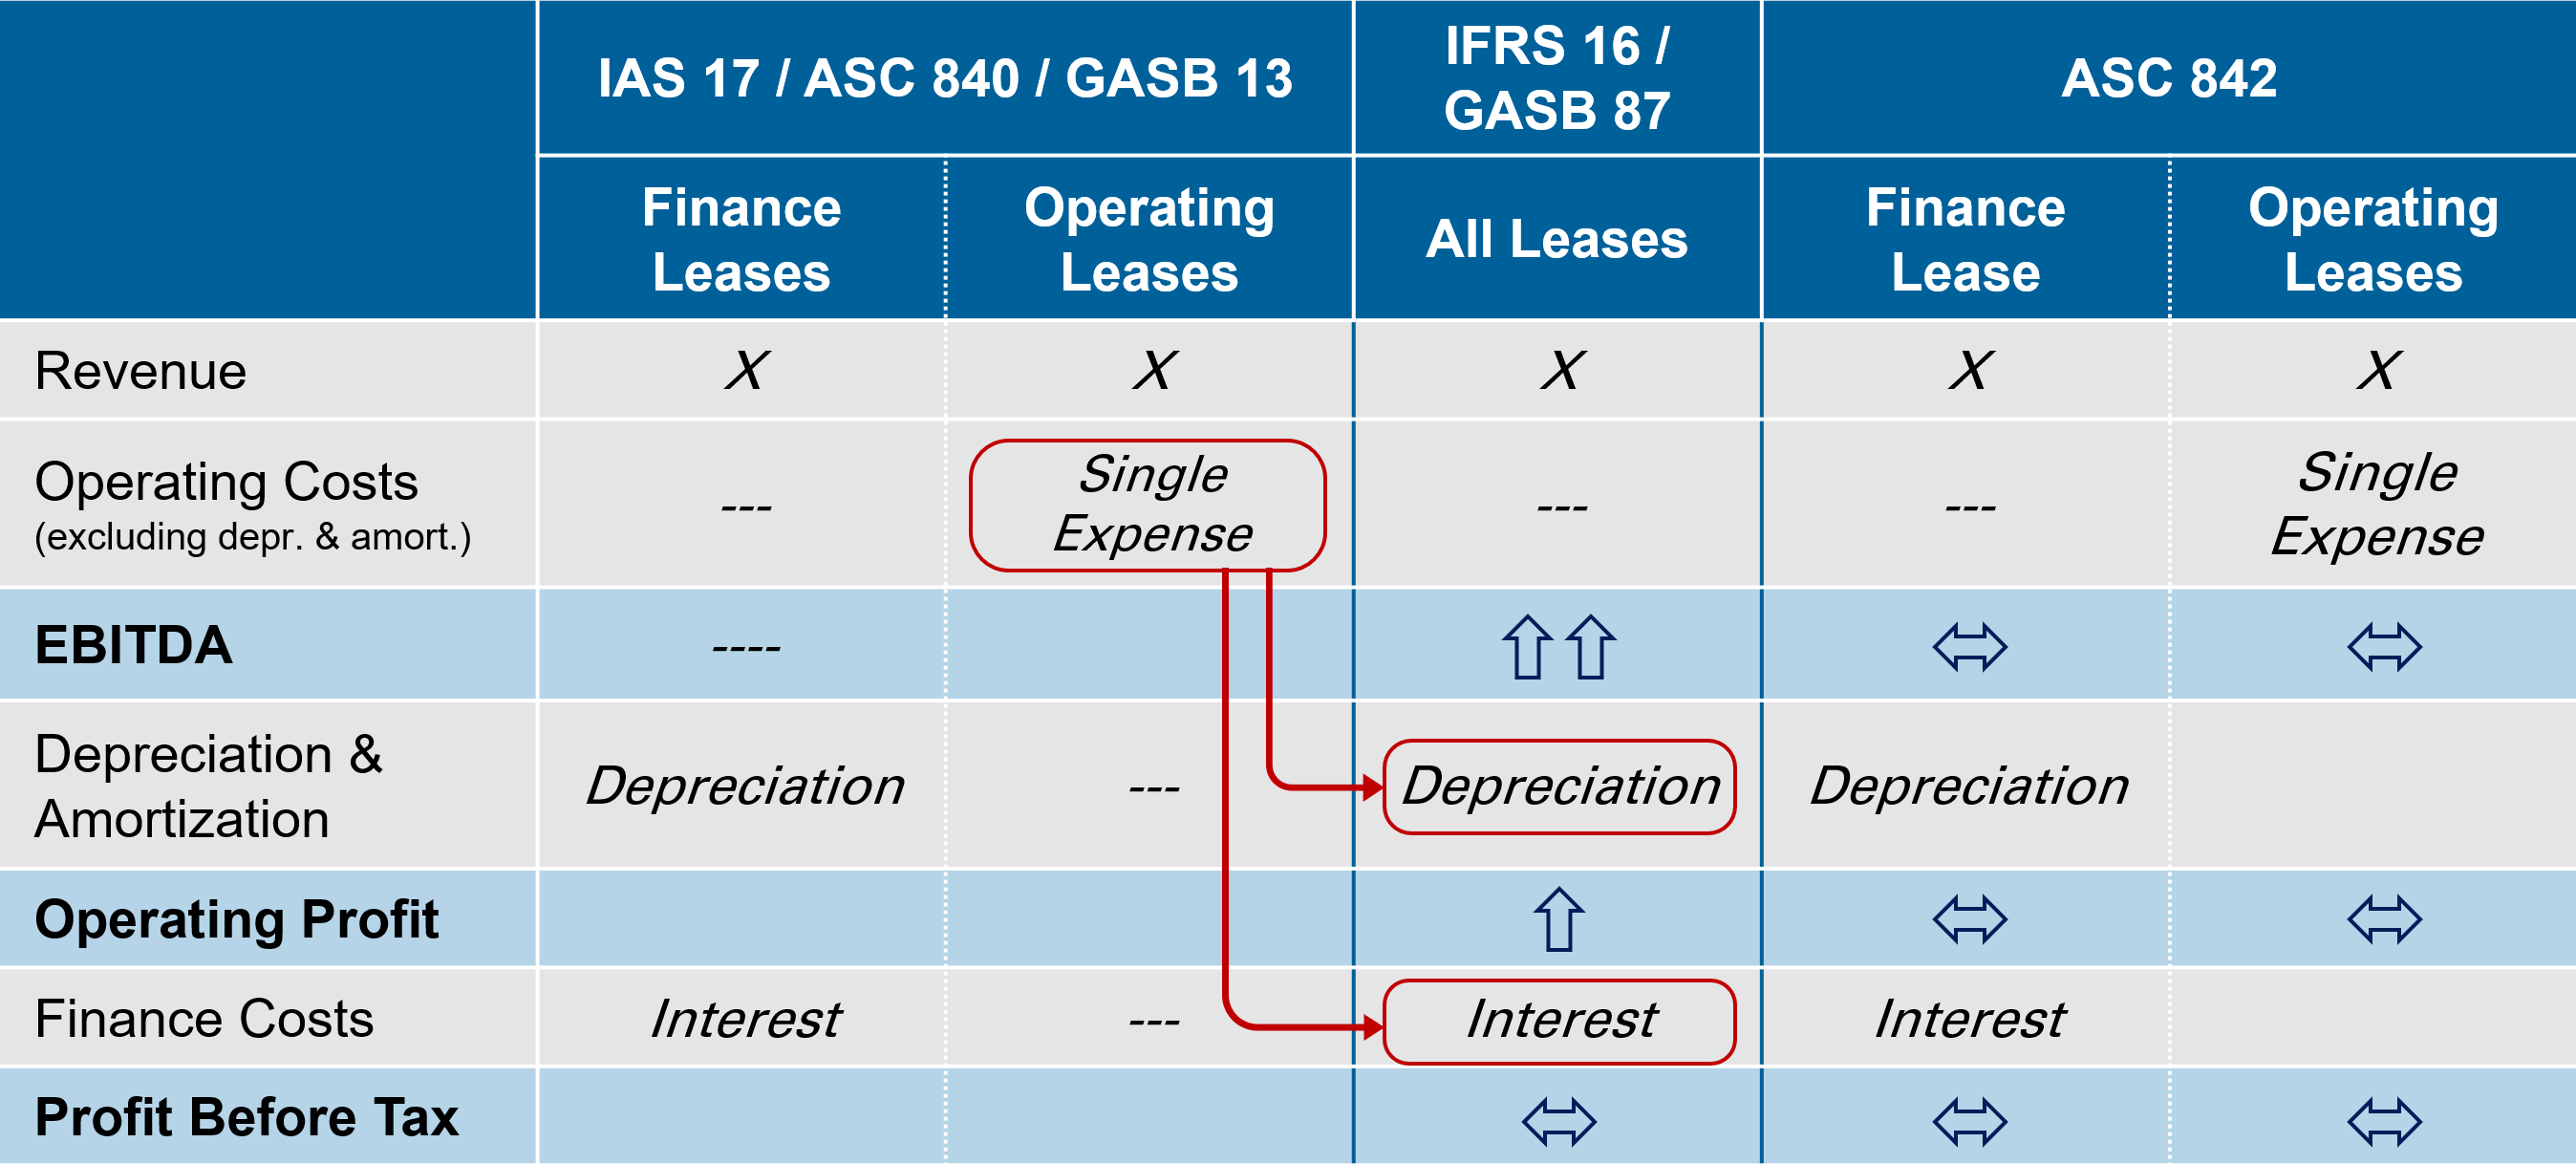 The P&L Presentation Changes with IFRS 16 and GASB 87